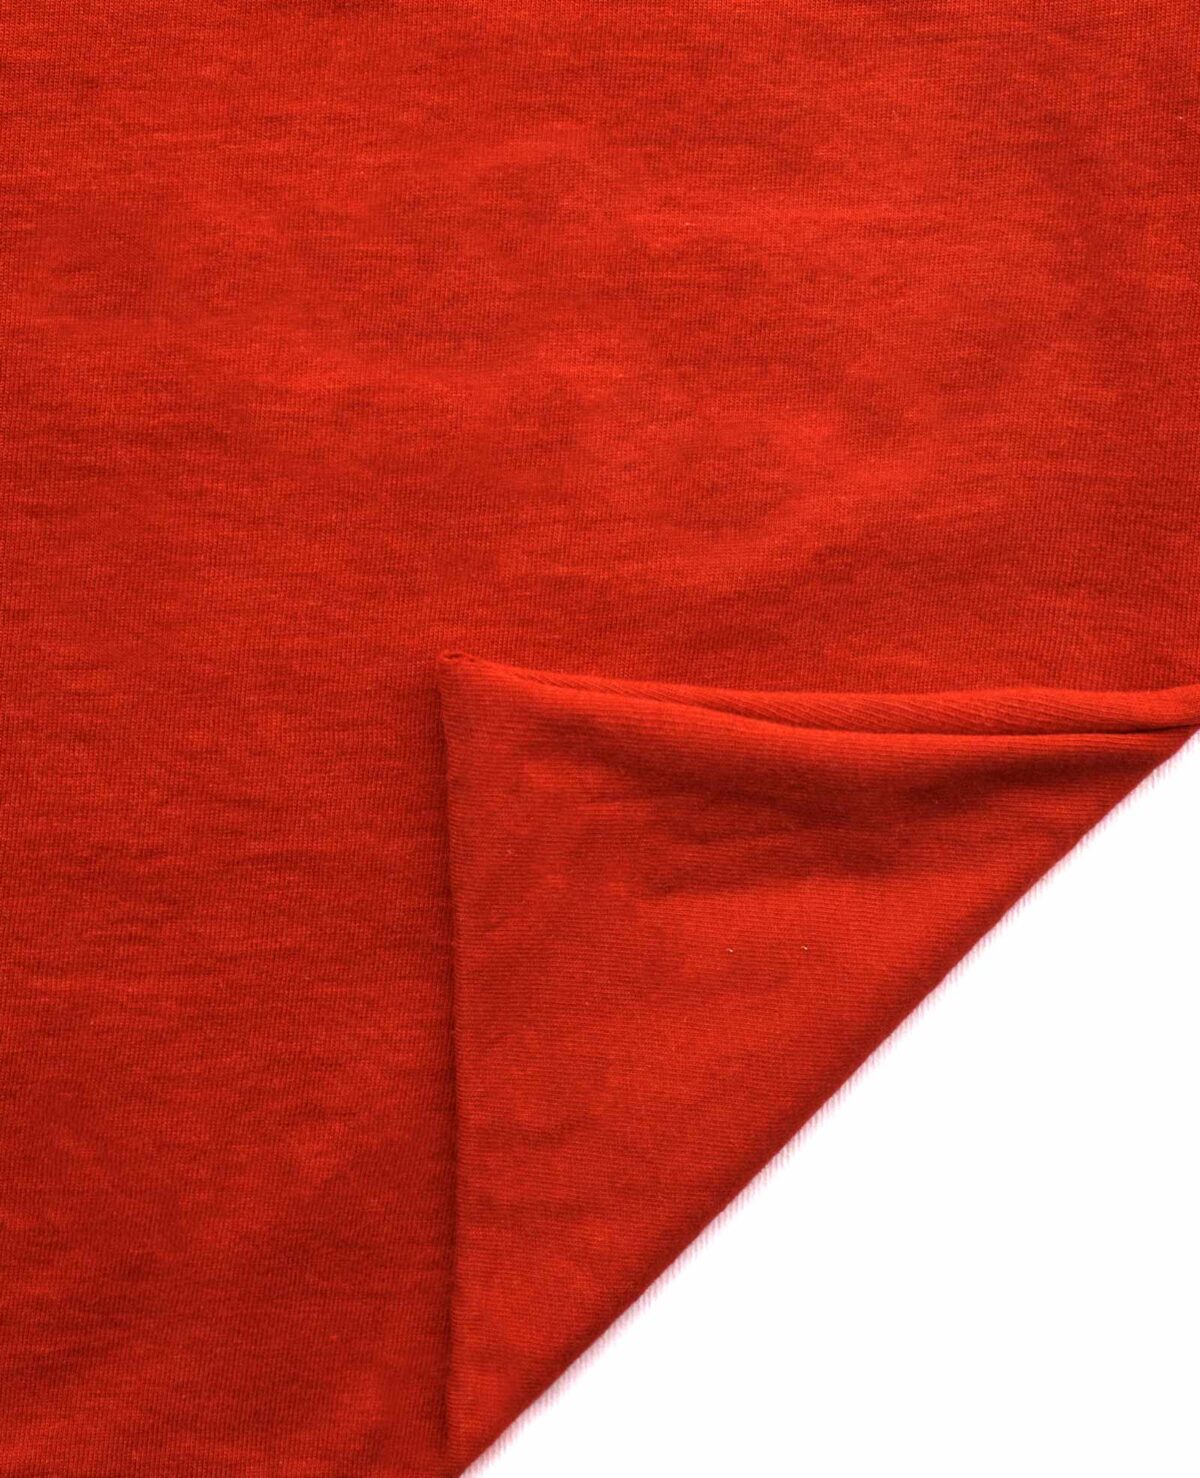 jersey cotton fabrics for manufacturing